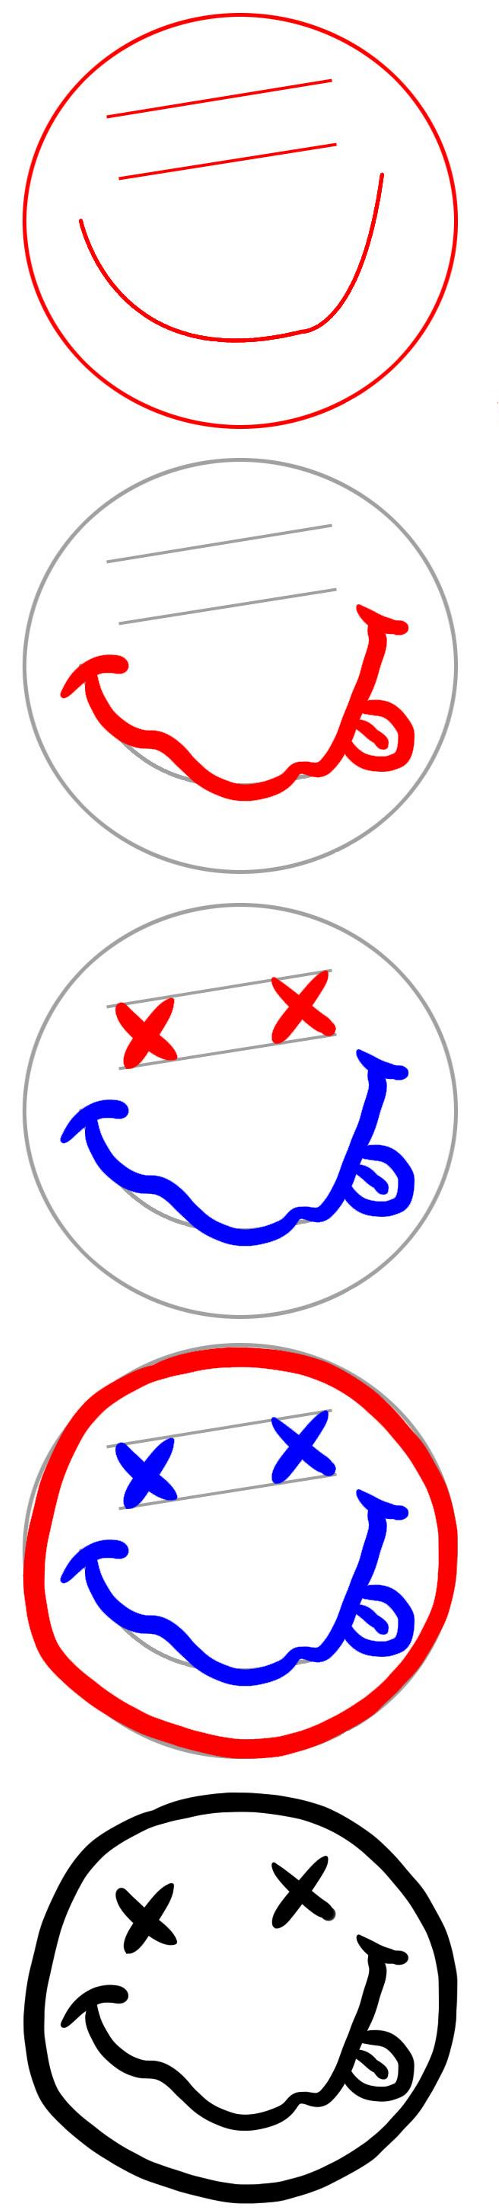 How to draw a smiley face?